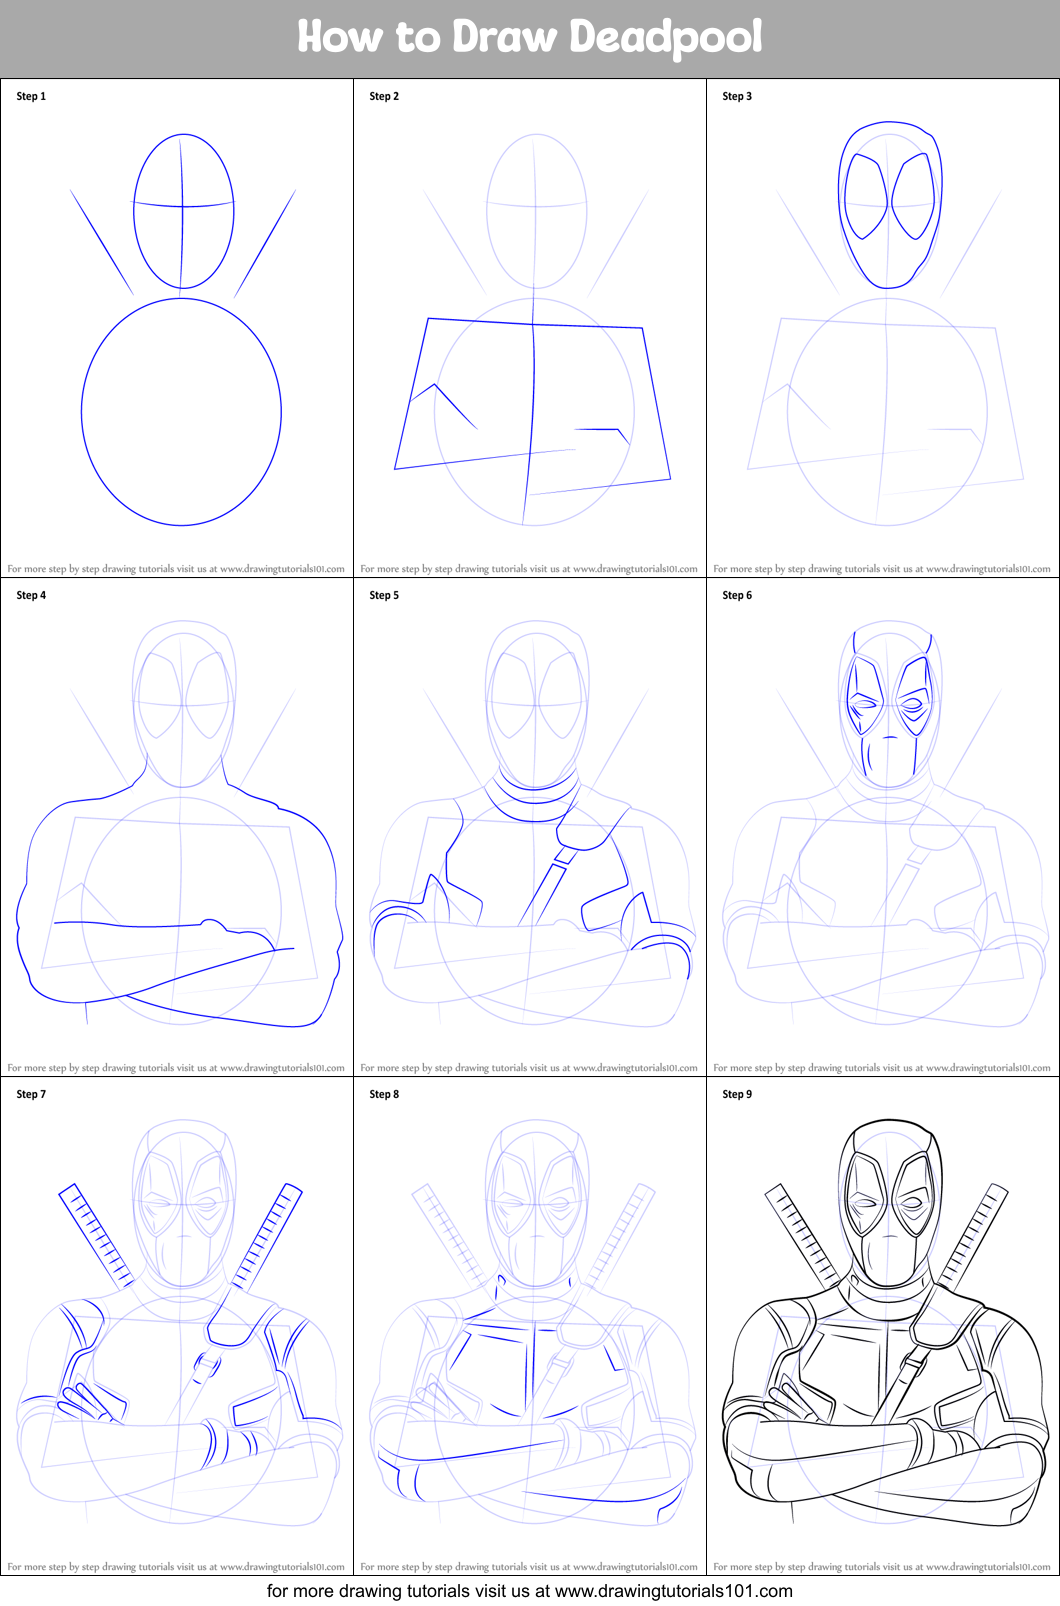 How To Draw Deadpool Gir, Step by Step, Drawing Guide, by Dawn - DragoArt